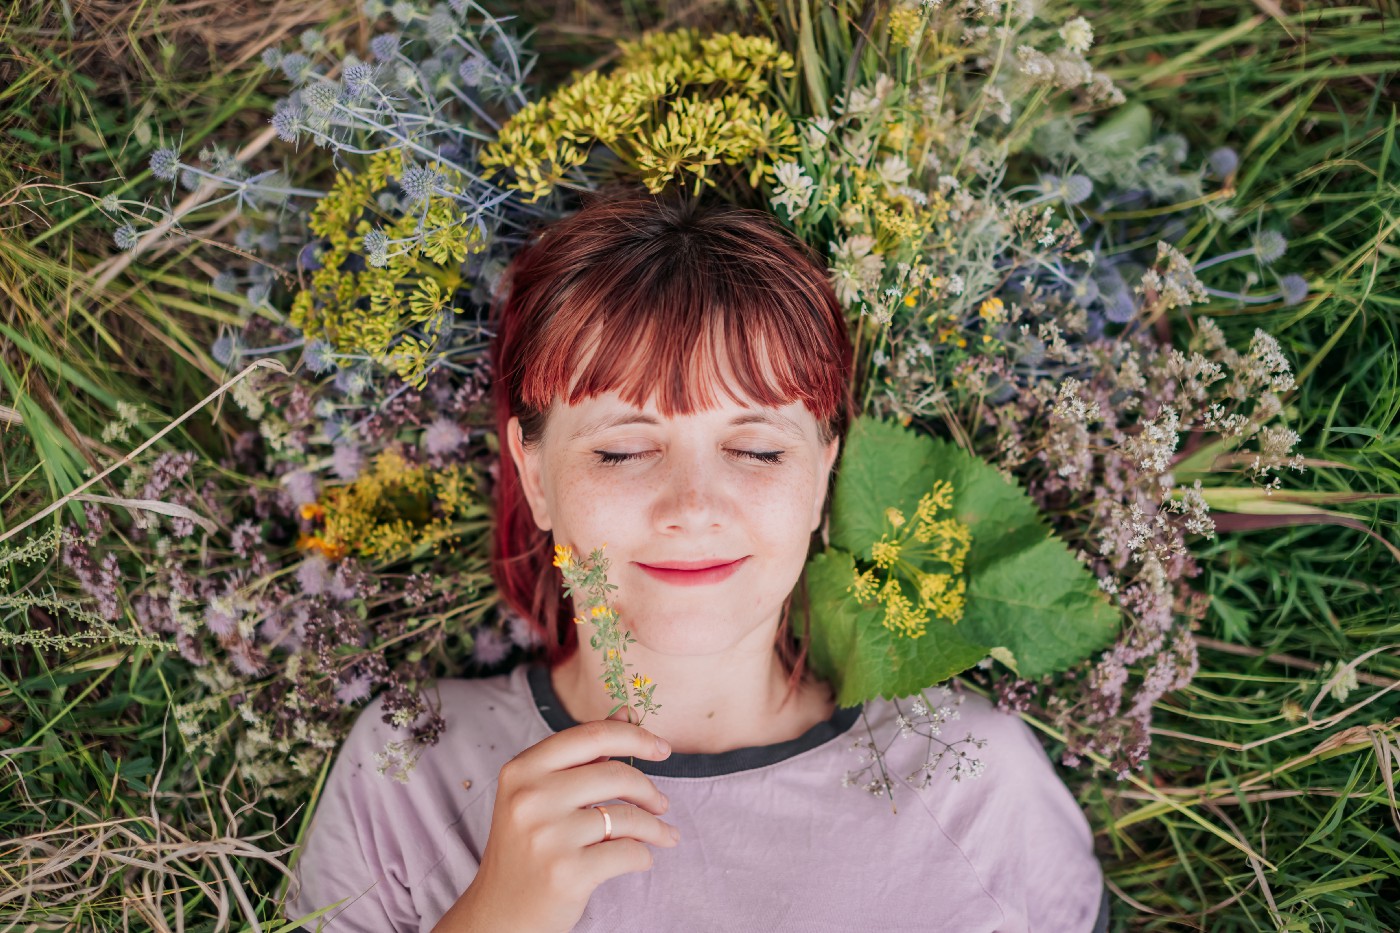 A woman is reclined on the grass with her head surrounded by wild flowers. She is smiling with her eyes closed and holding a sprig of a plant.